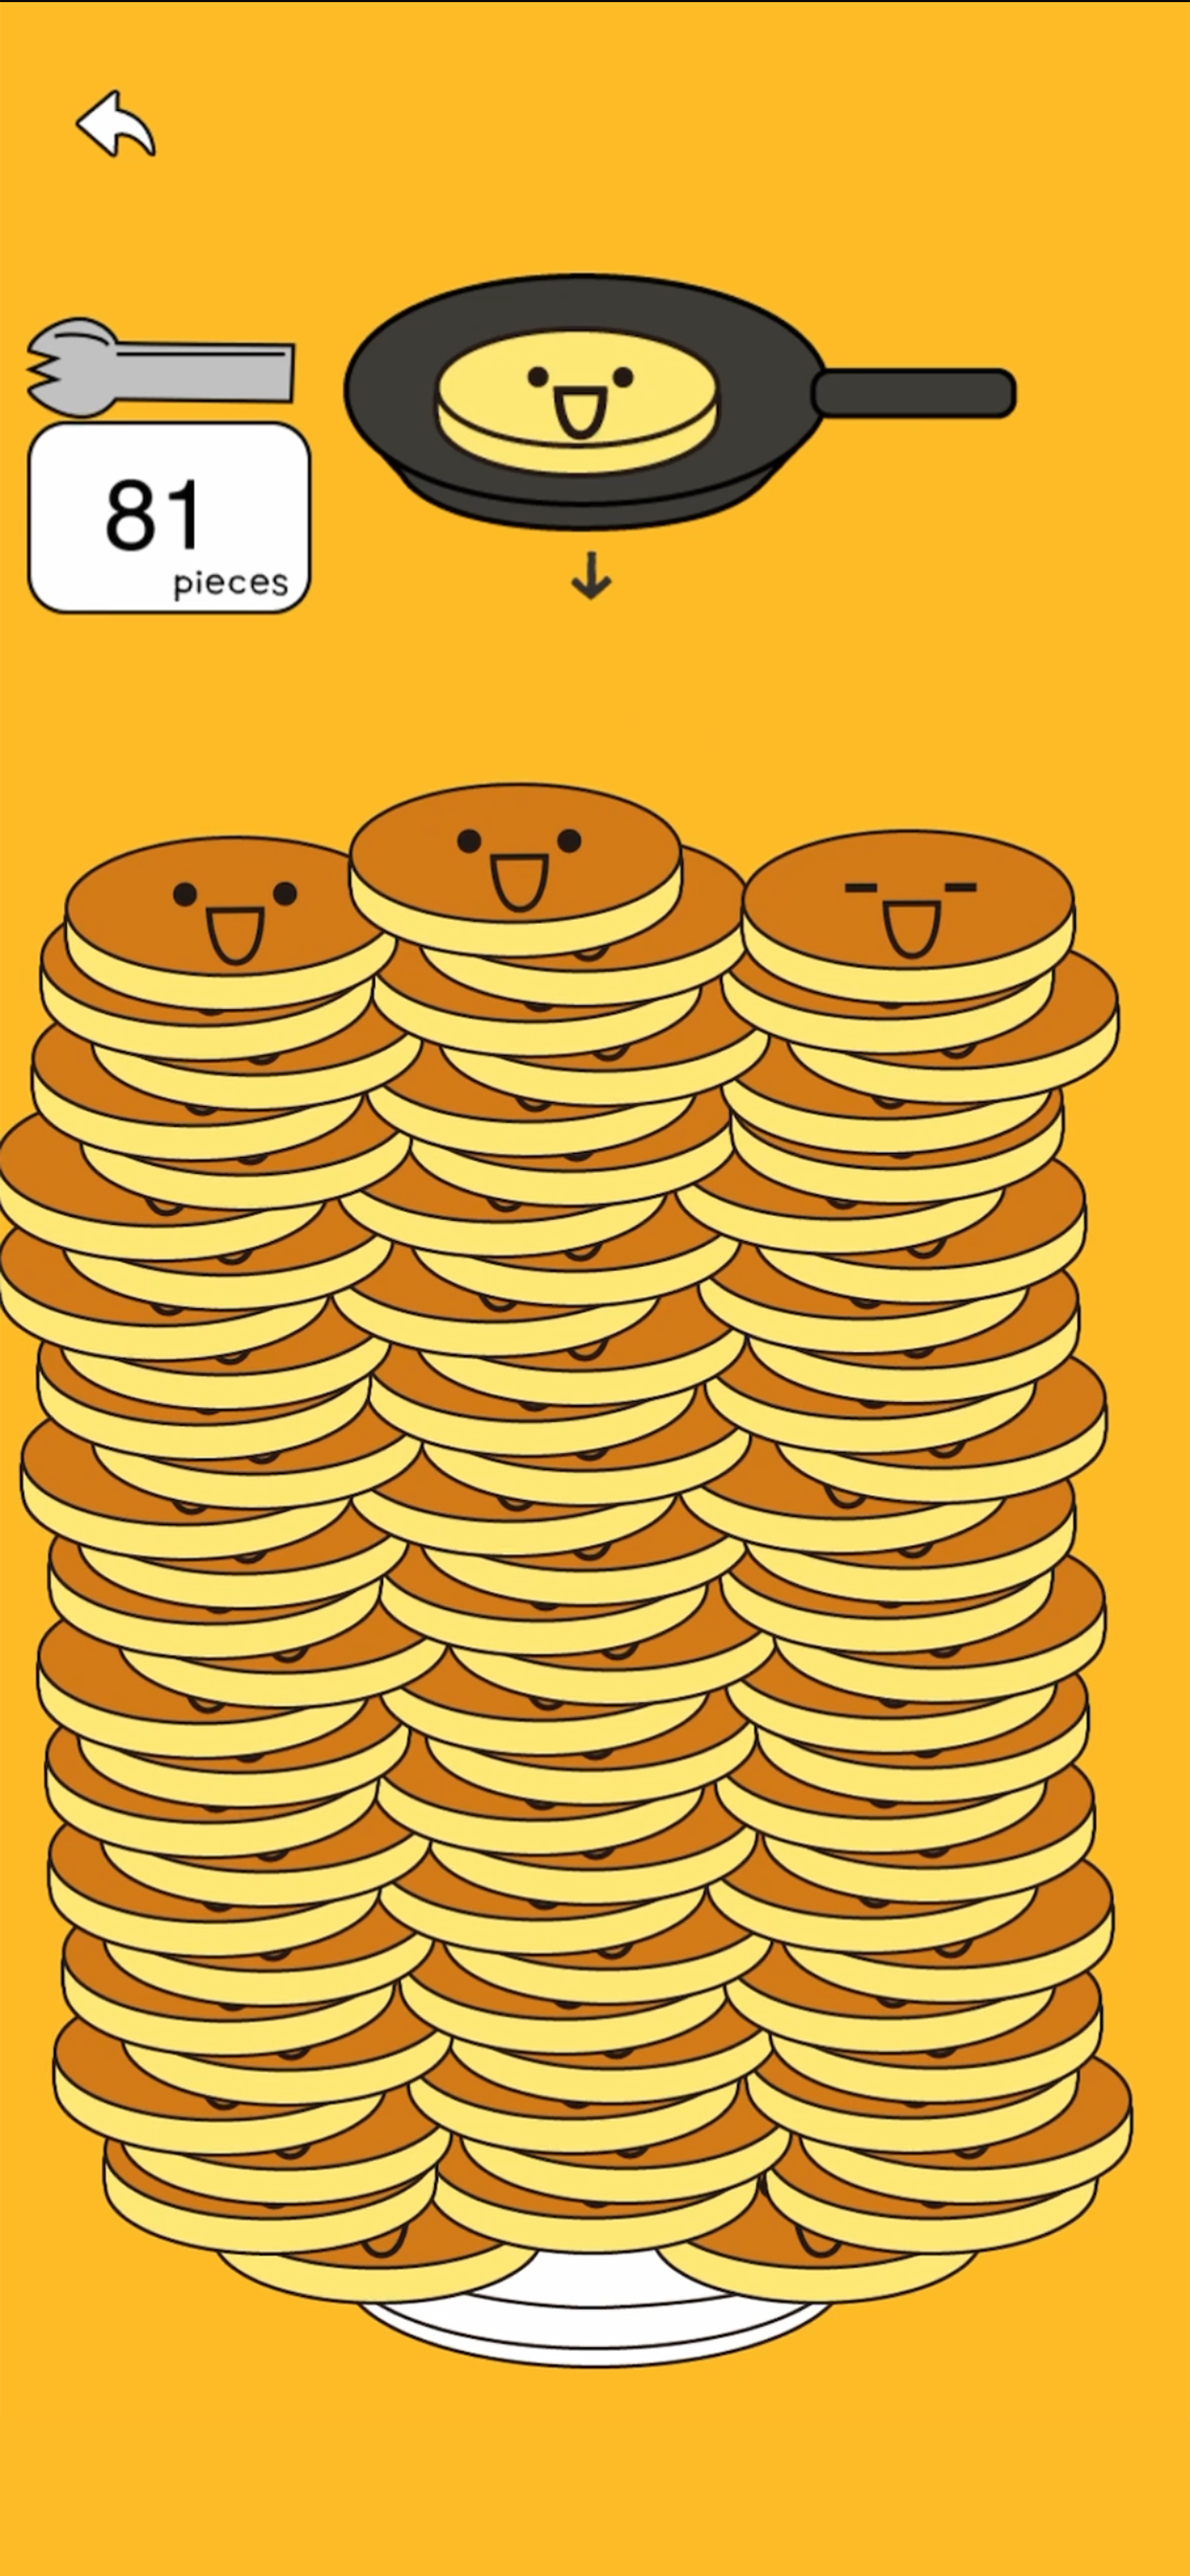 Android application Pancake Tower-Game for kids screenshort